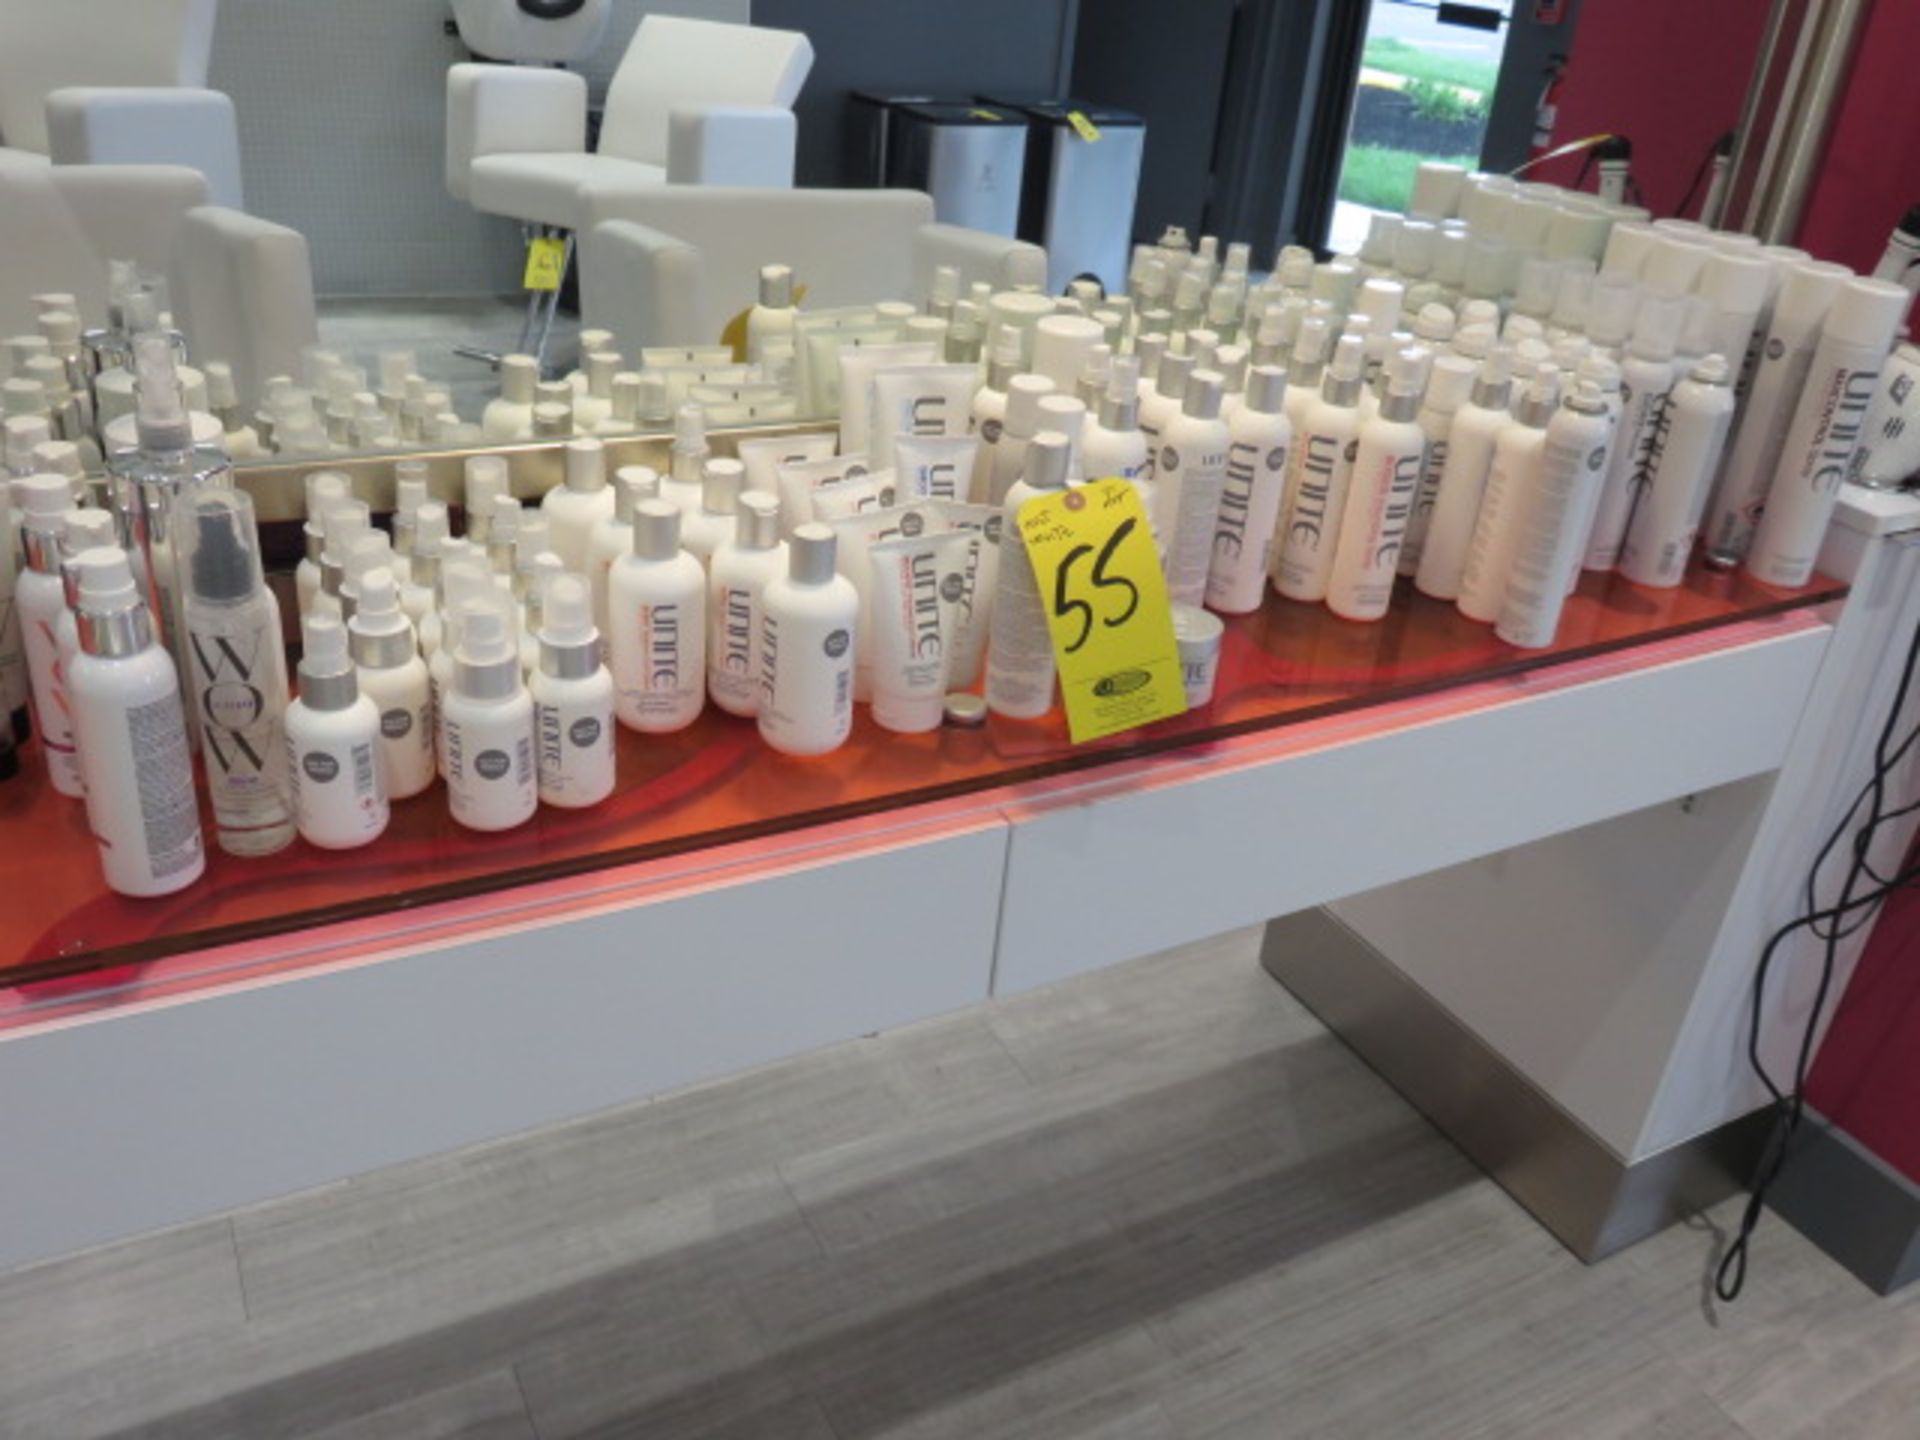 ASSORTED UNITE HAIR PRODUCTS, SPRAYS, CREAMS, OPEN BOTTLES